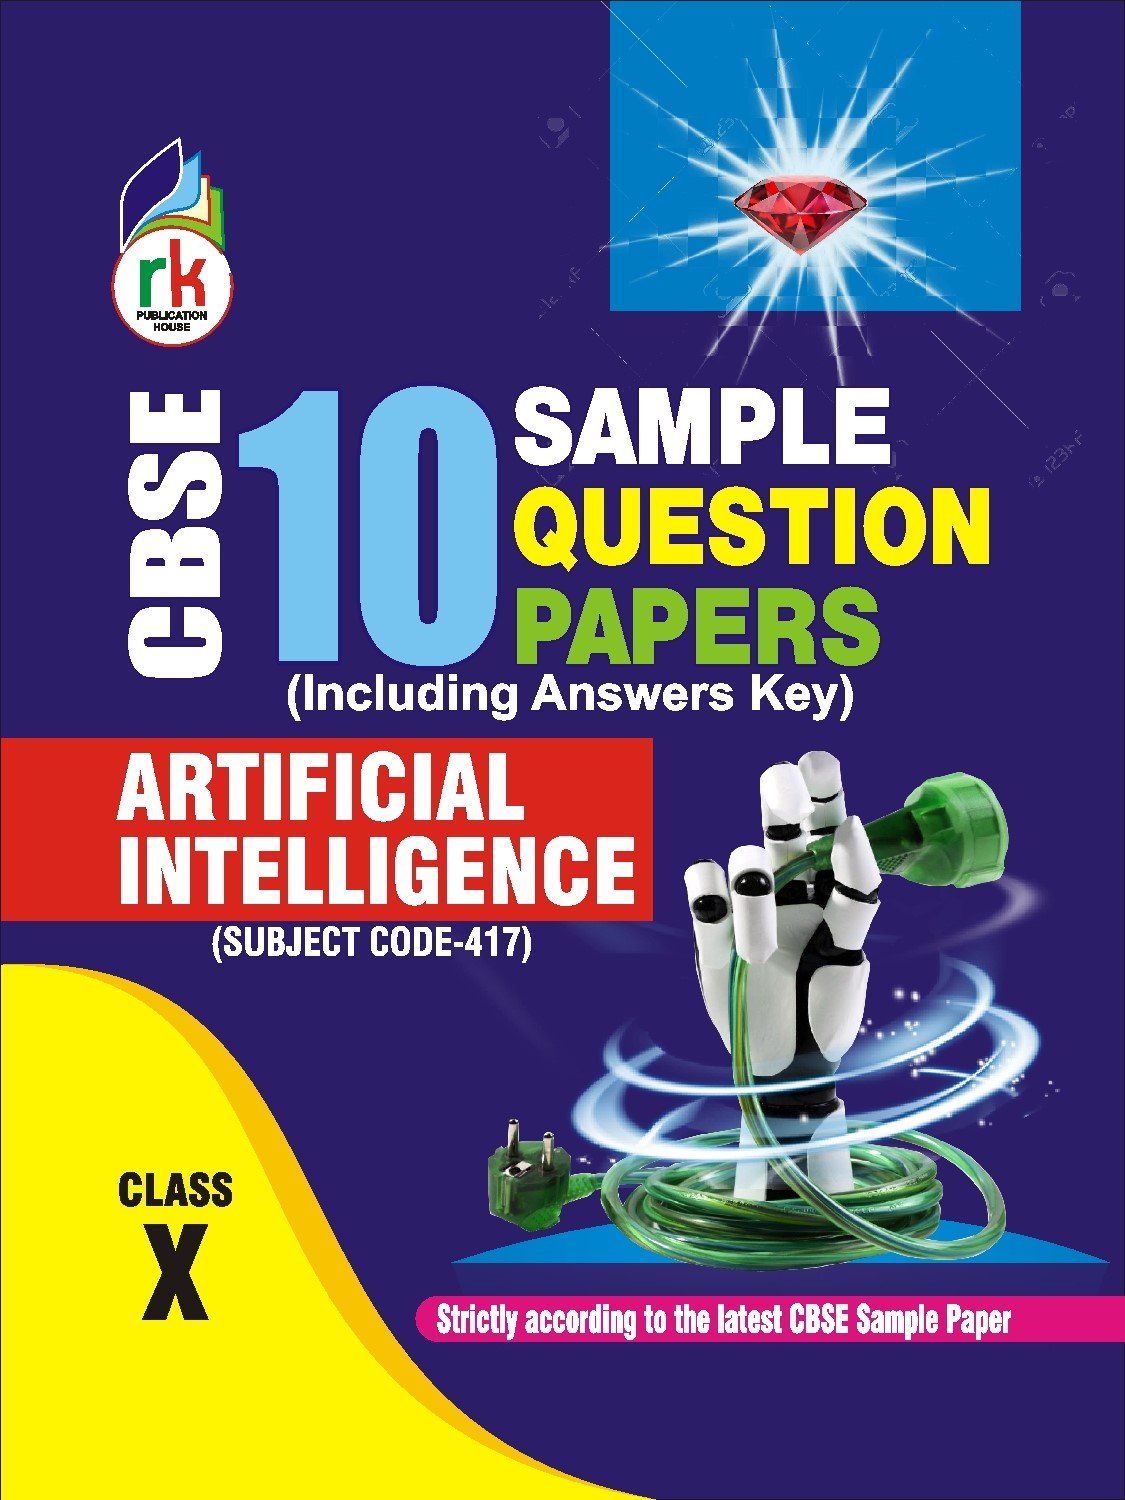 Artificial Intelligence Sample Papers - 10